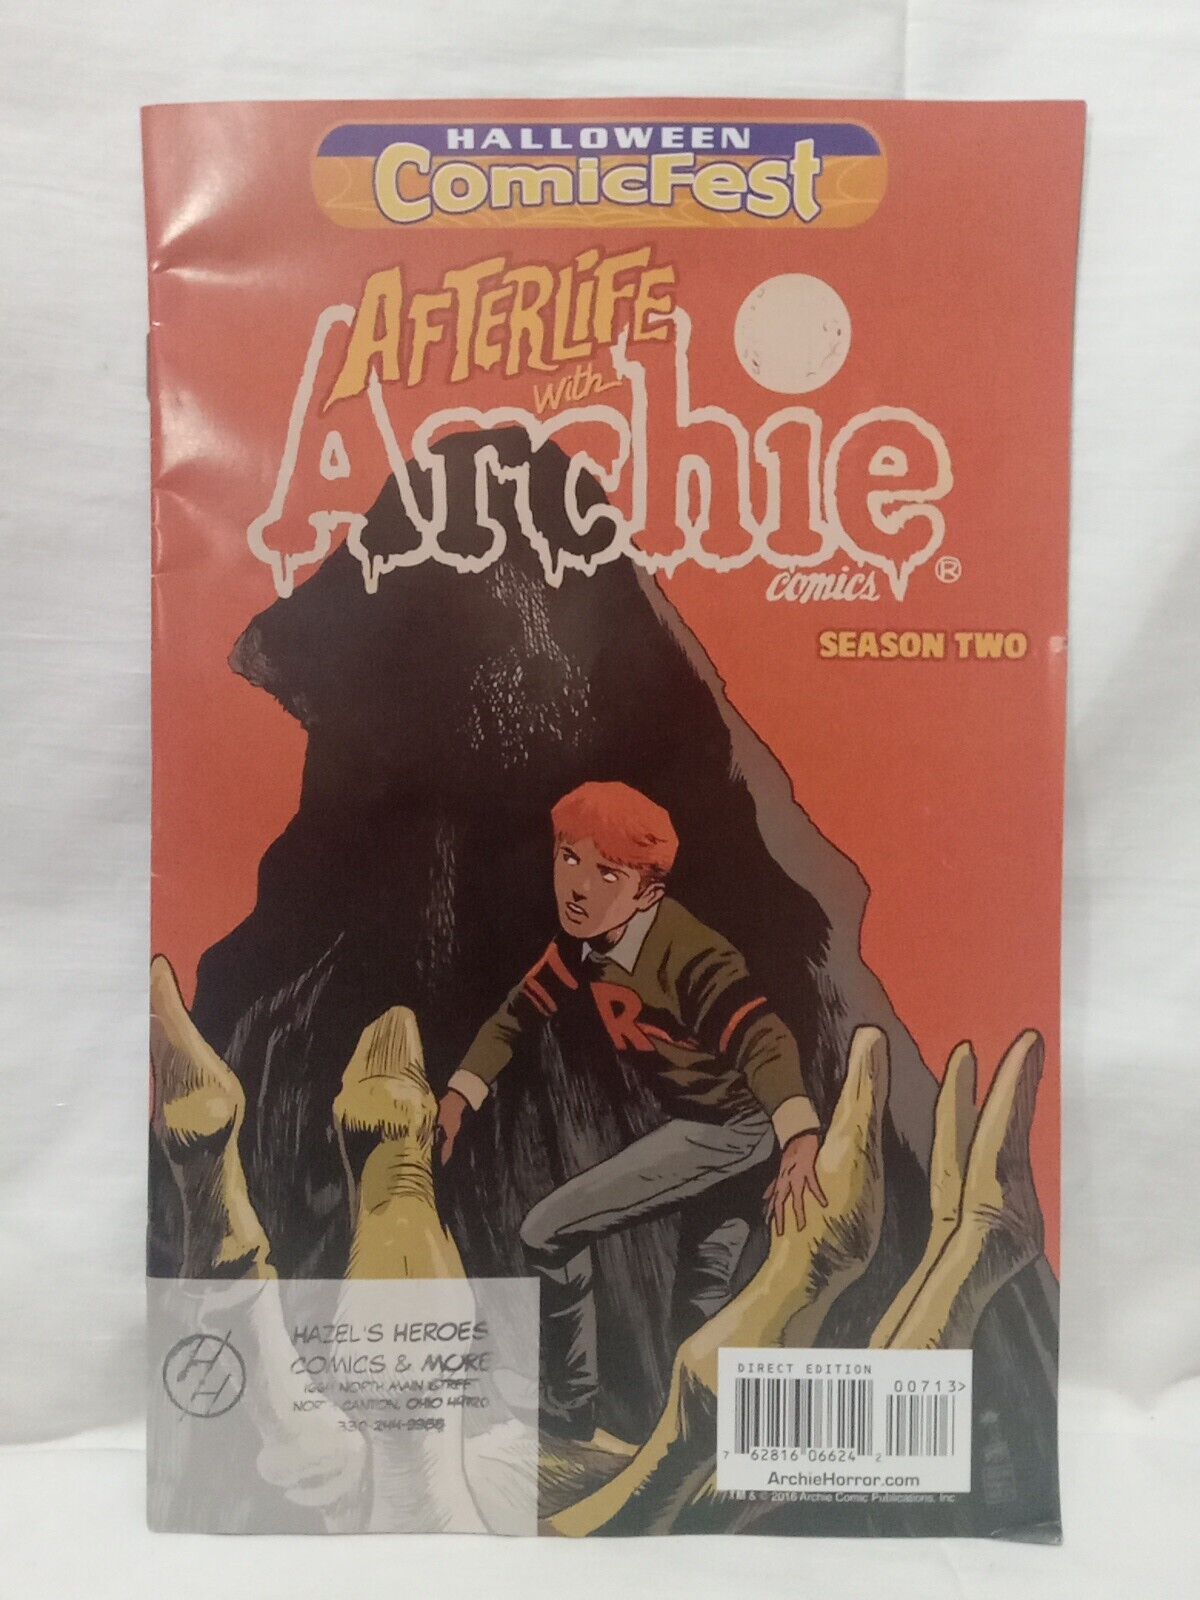 Afterlife with Archie Season 2 Halloween Comicfest 2016 